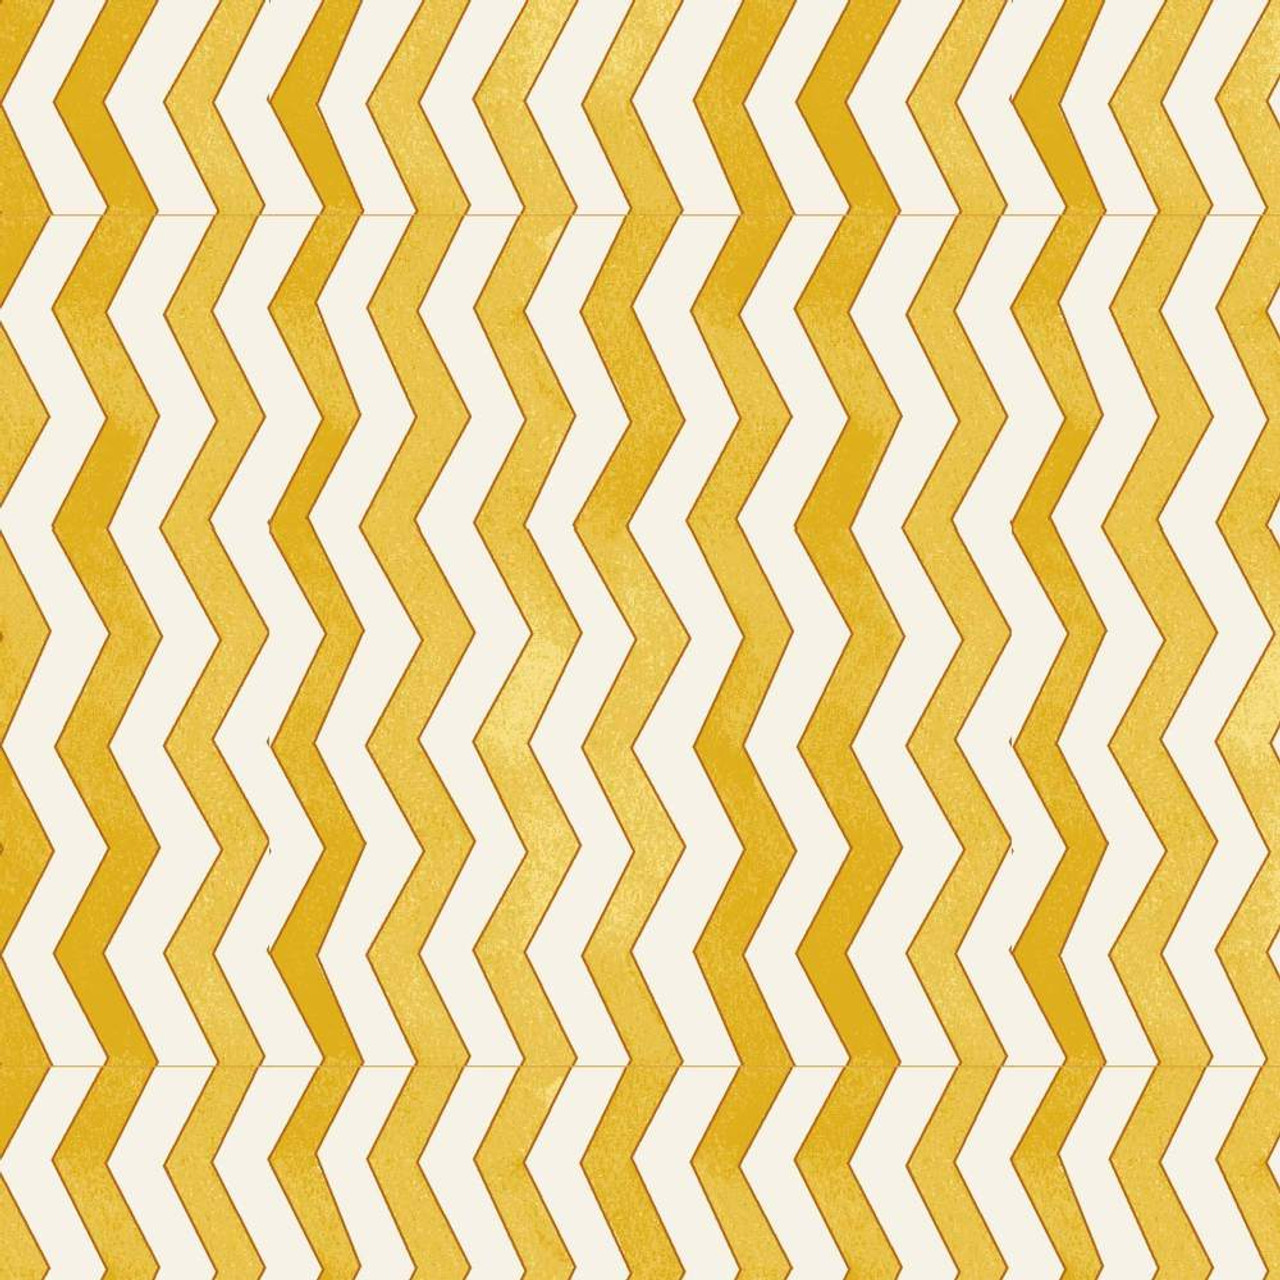 Henry Glass Autumn Elegance Metallic Zigzag Line Gold Fabric By The Yard